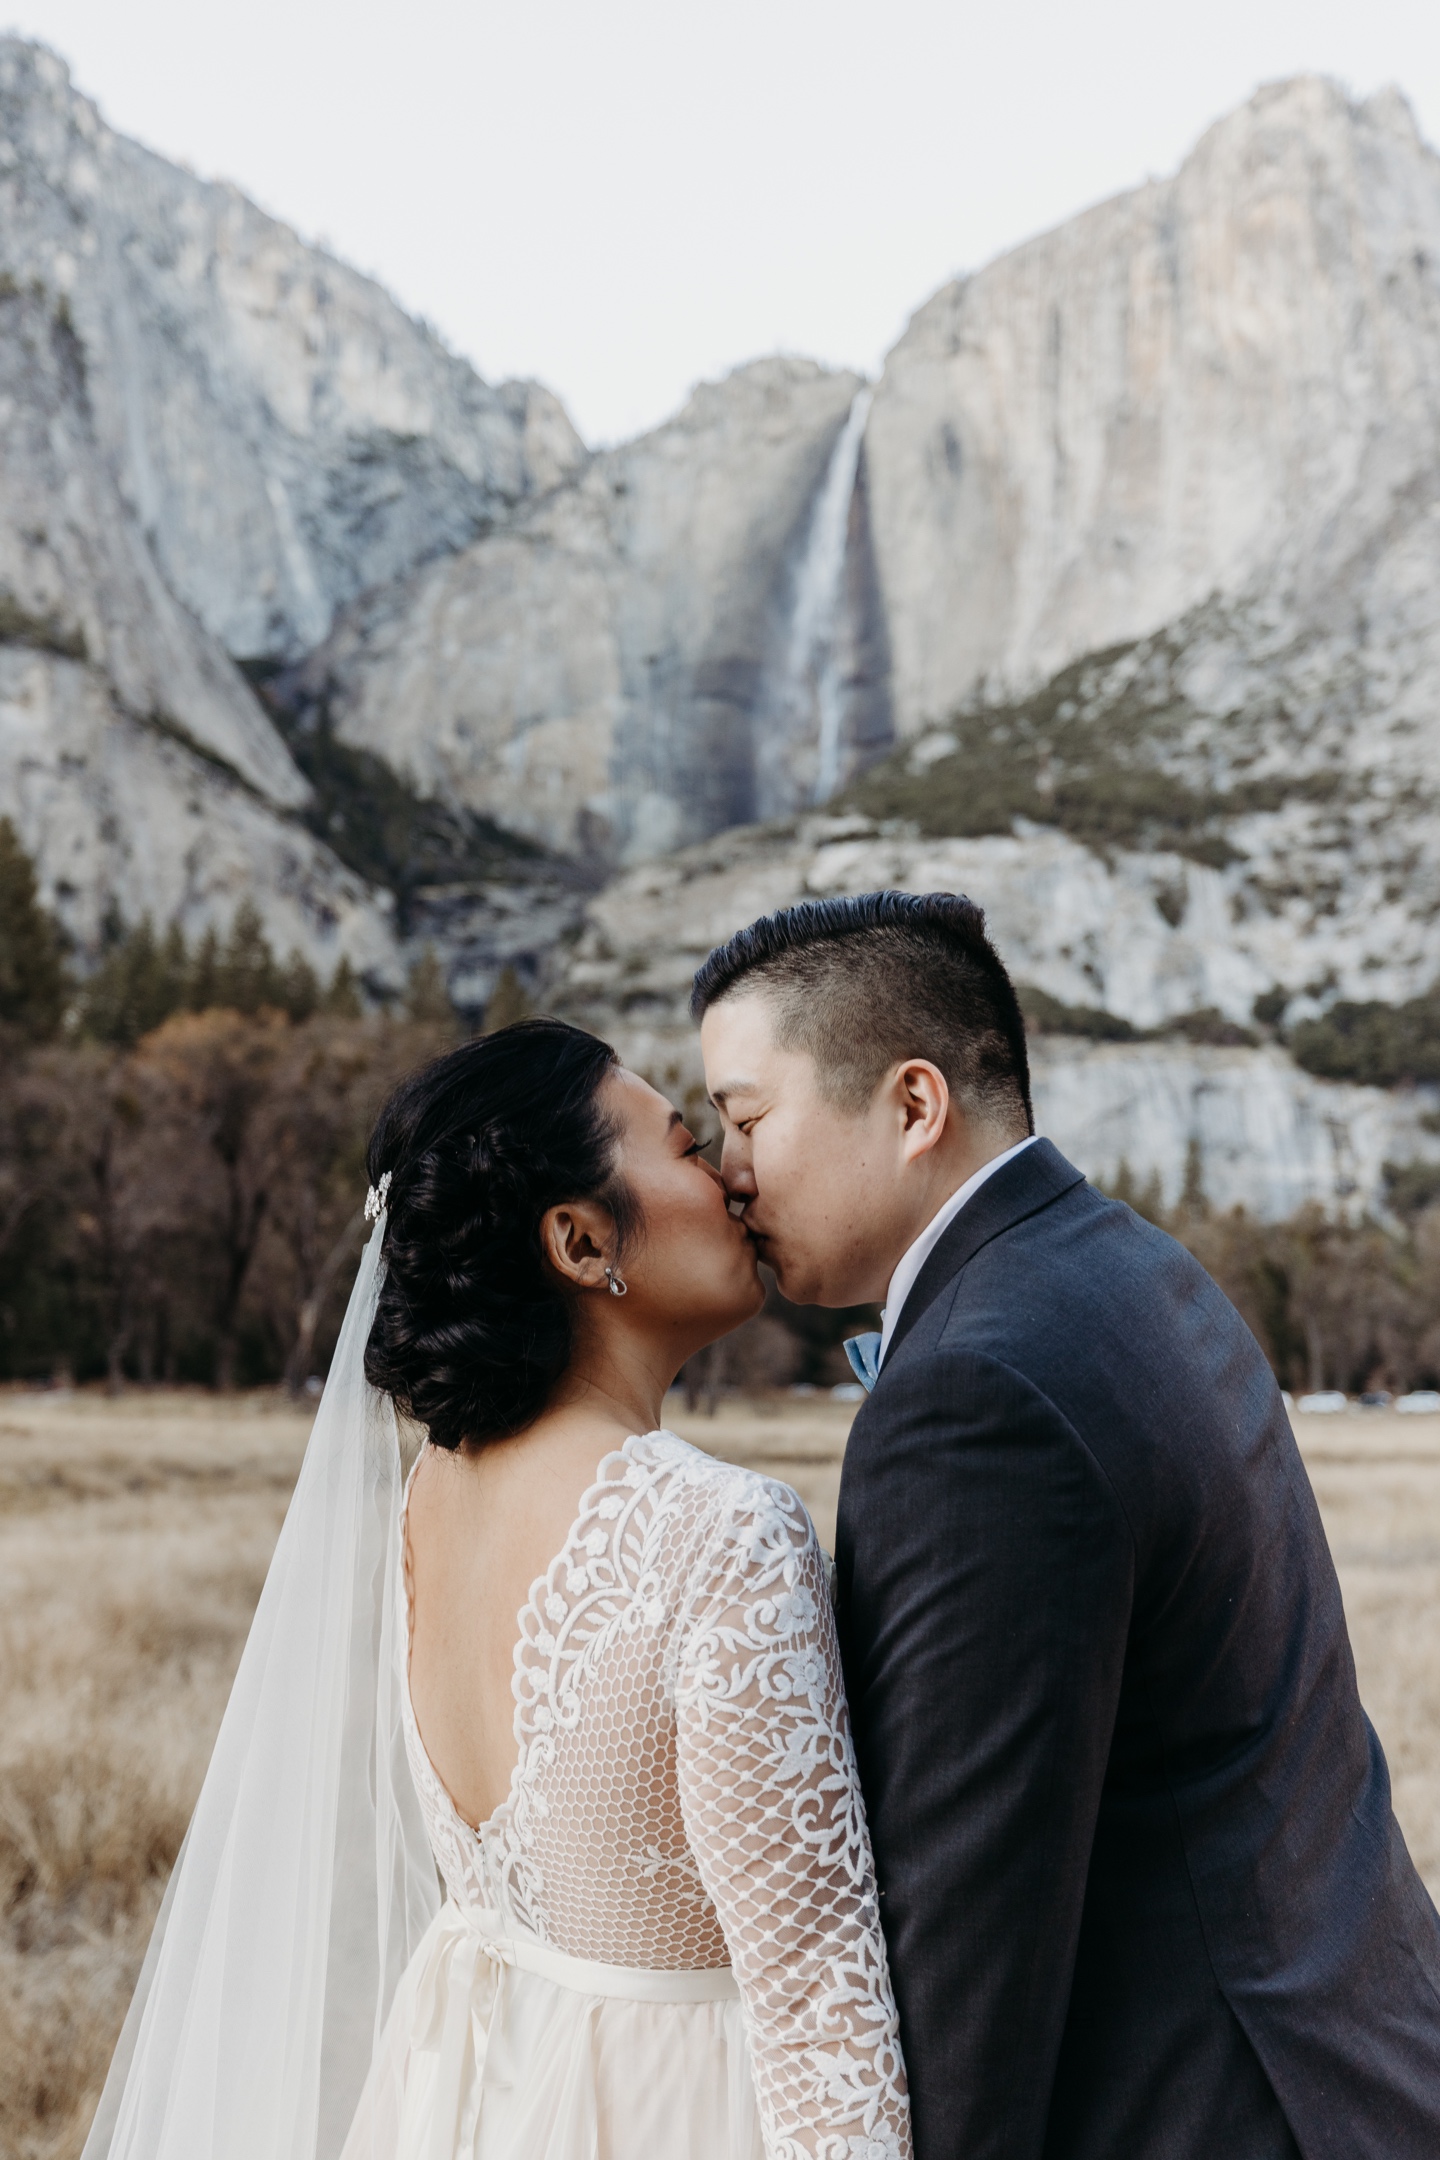 Bride and groom kiss in front of Yosemite Falls after their Yosemite elopement.